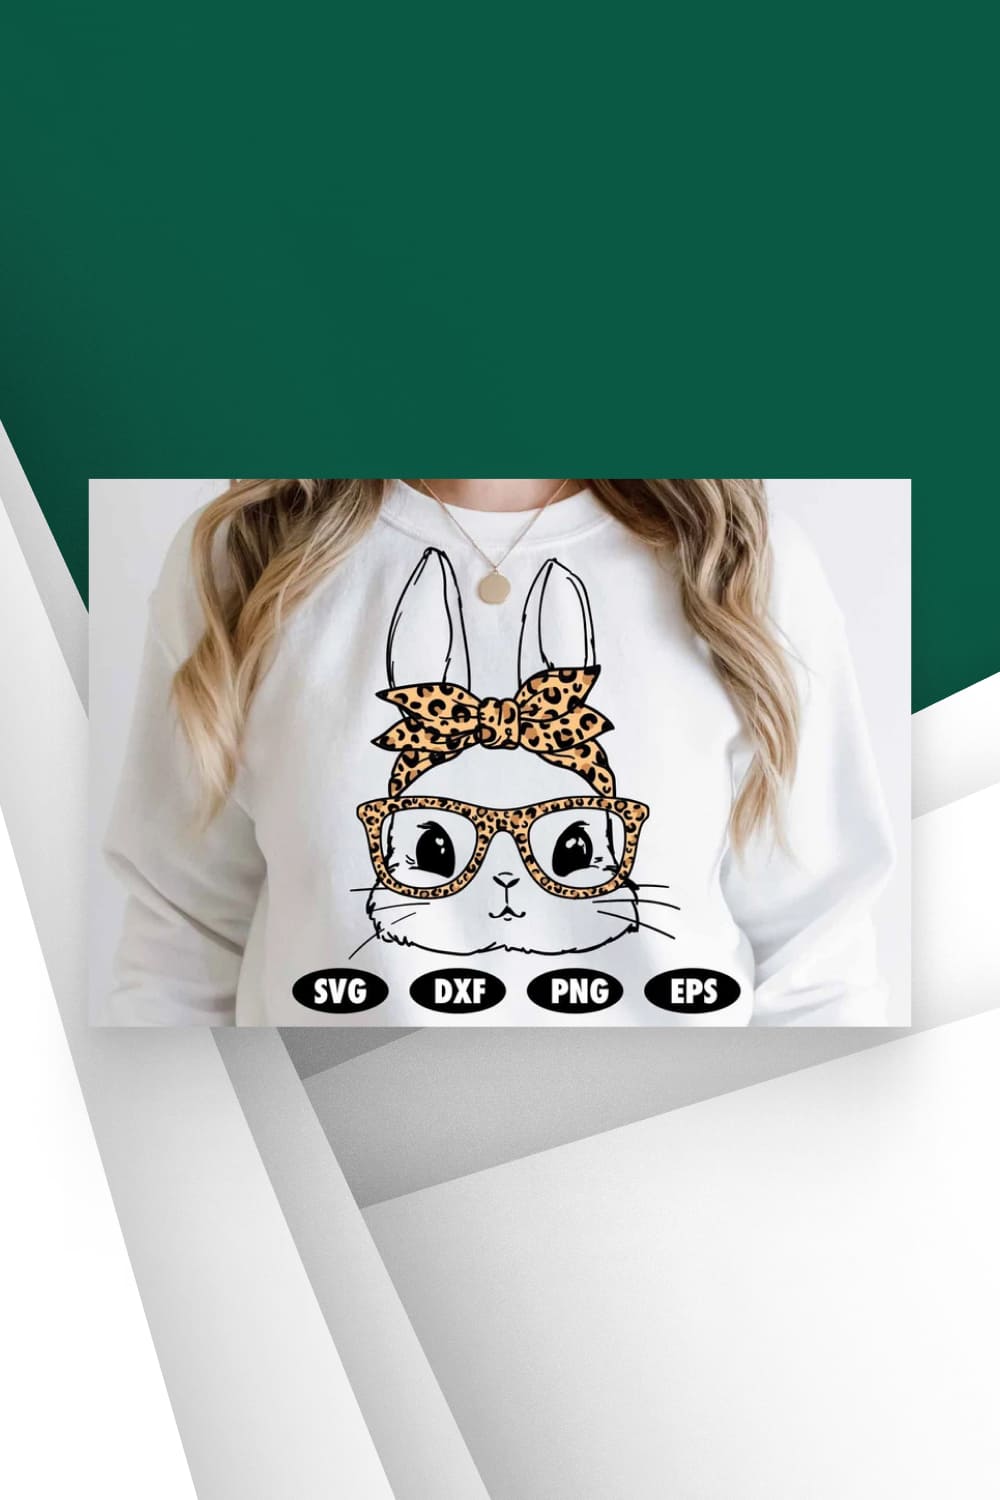 White t-shirt with bunny in glasses.